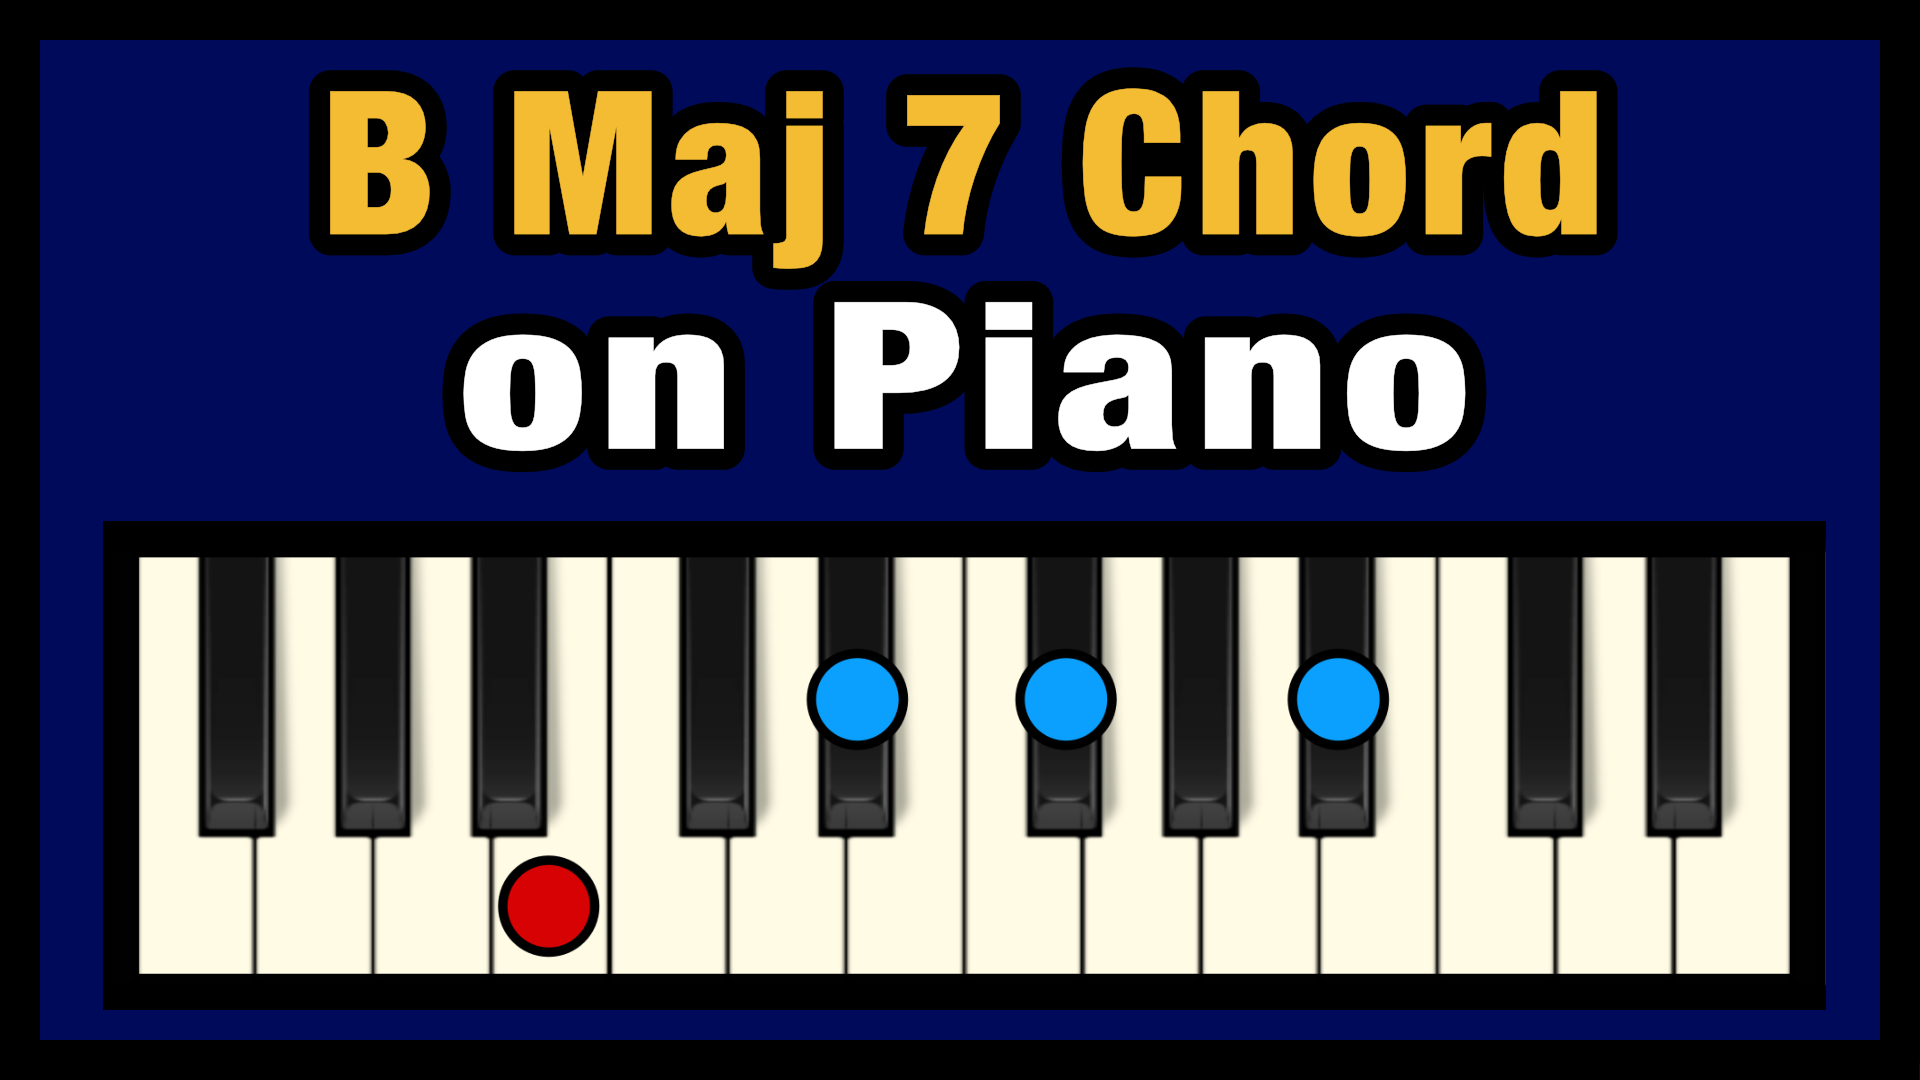 Campo Vacunar liebre B Maj 7 Chord on Piano (Free Chart) – Professional Composers